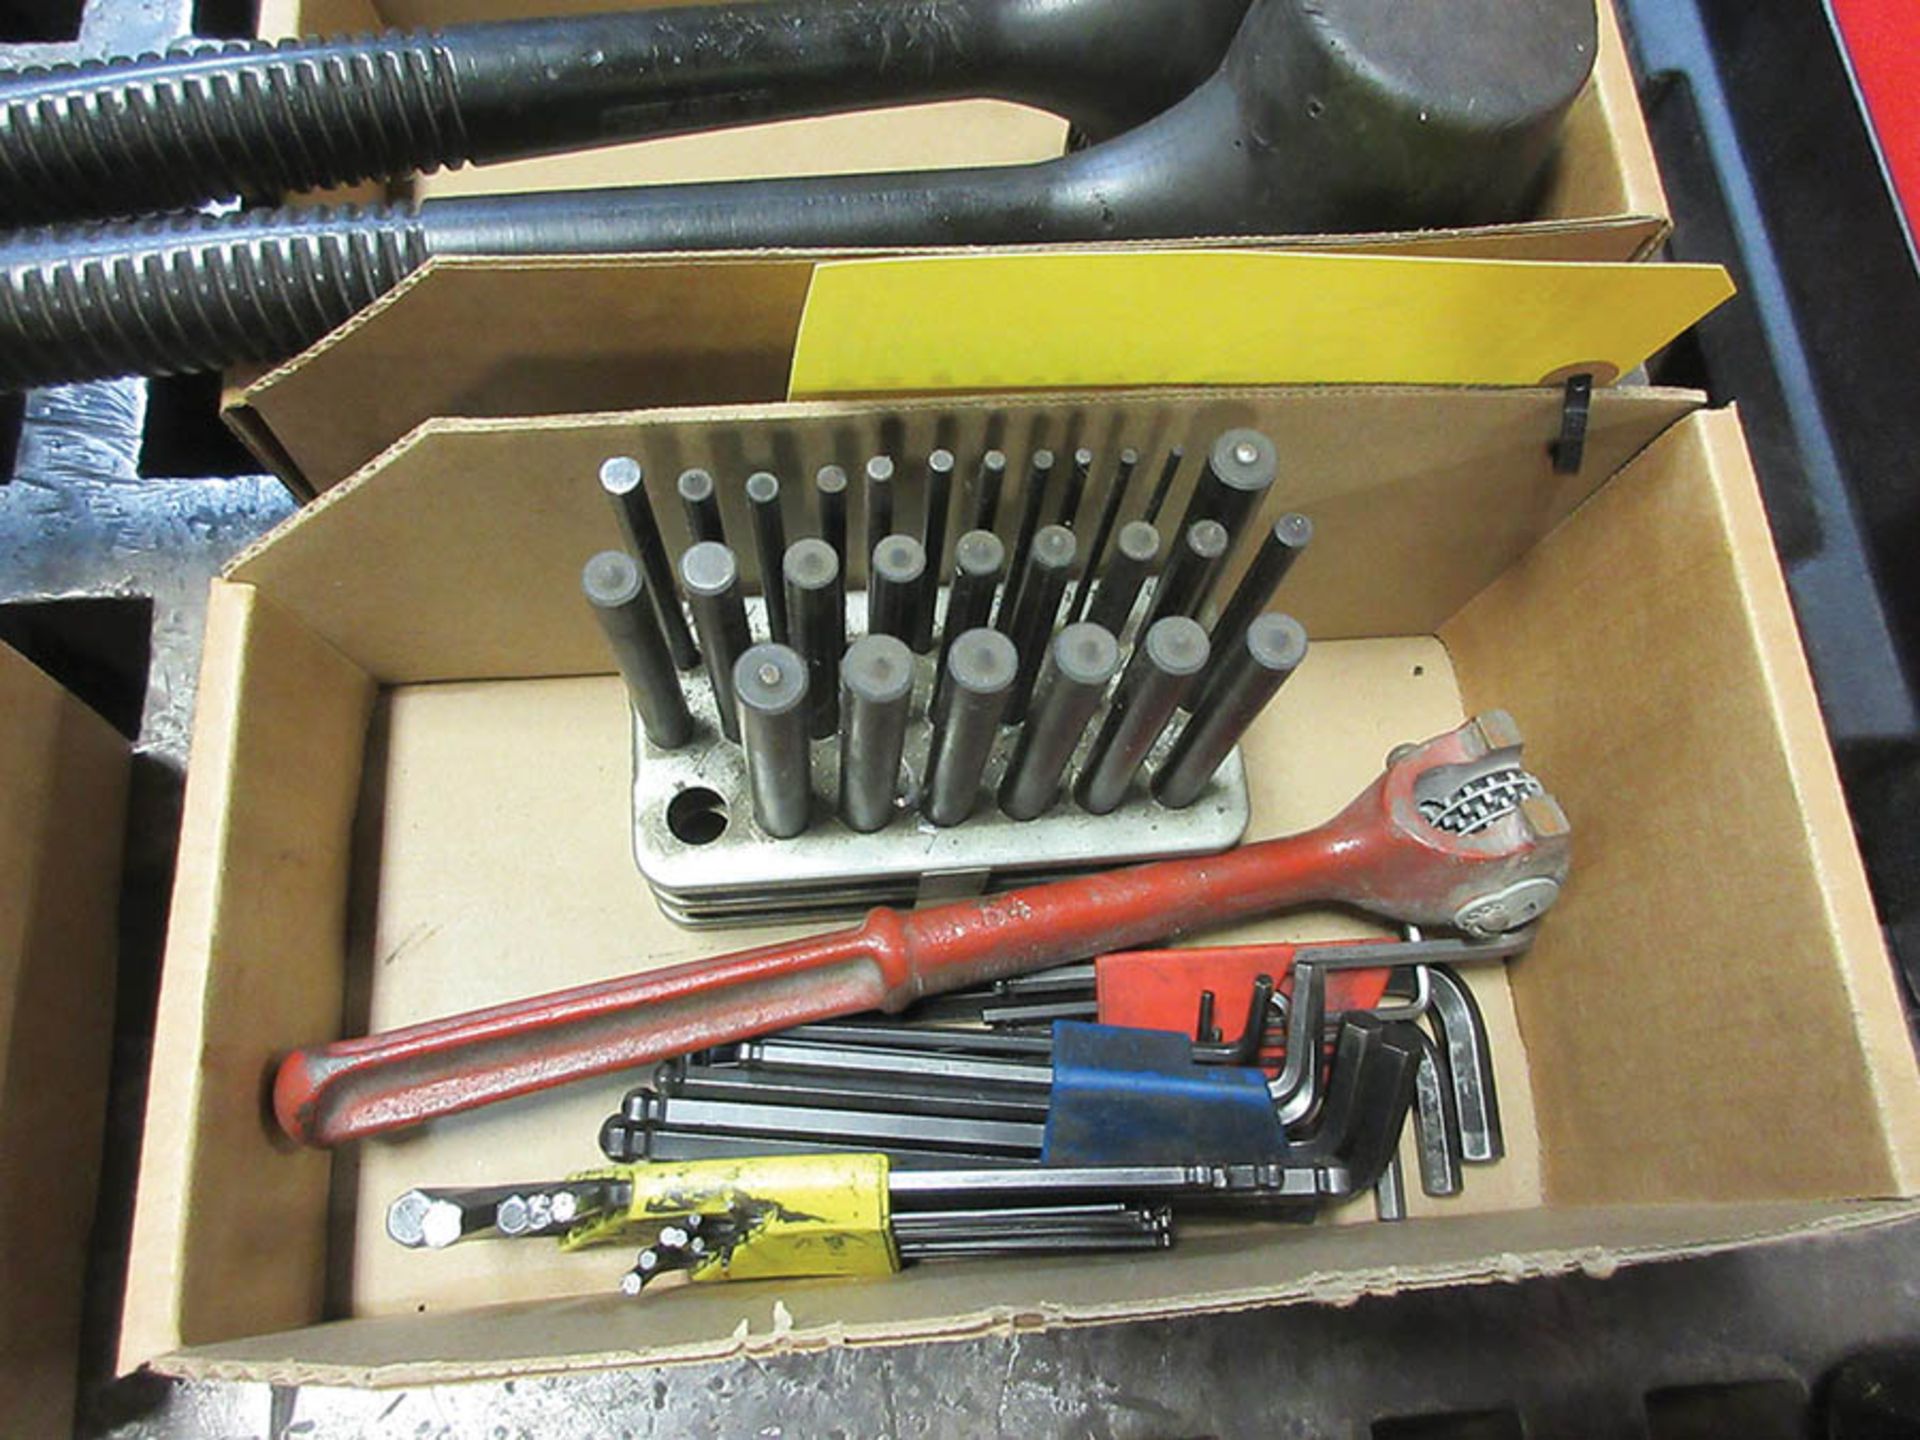 PUNCH SET, DESMOND CUTTER TOOL, AND ALLEN WRENCHES